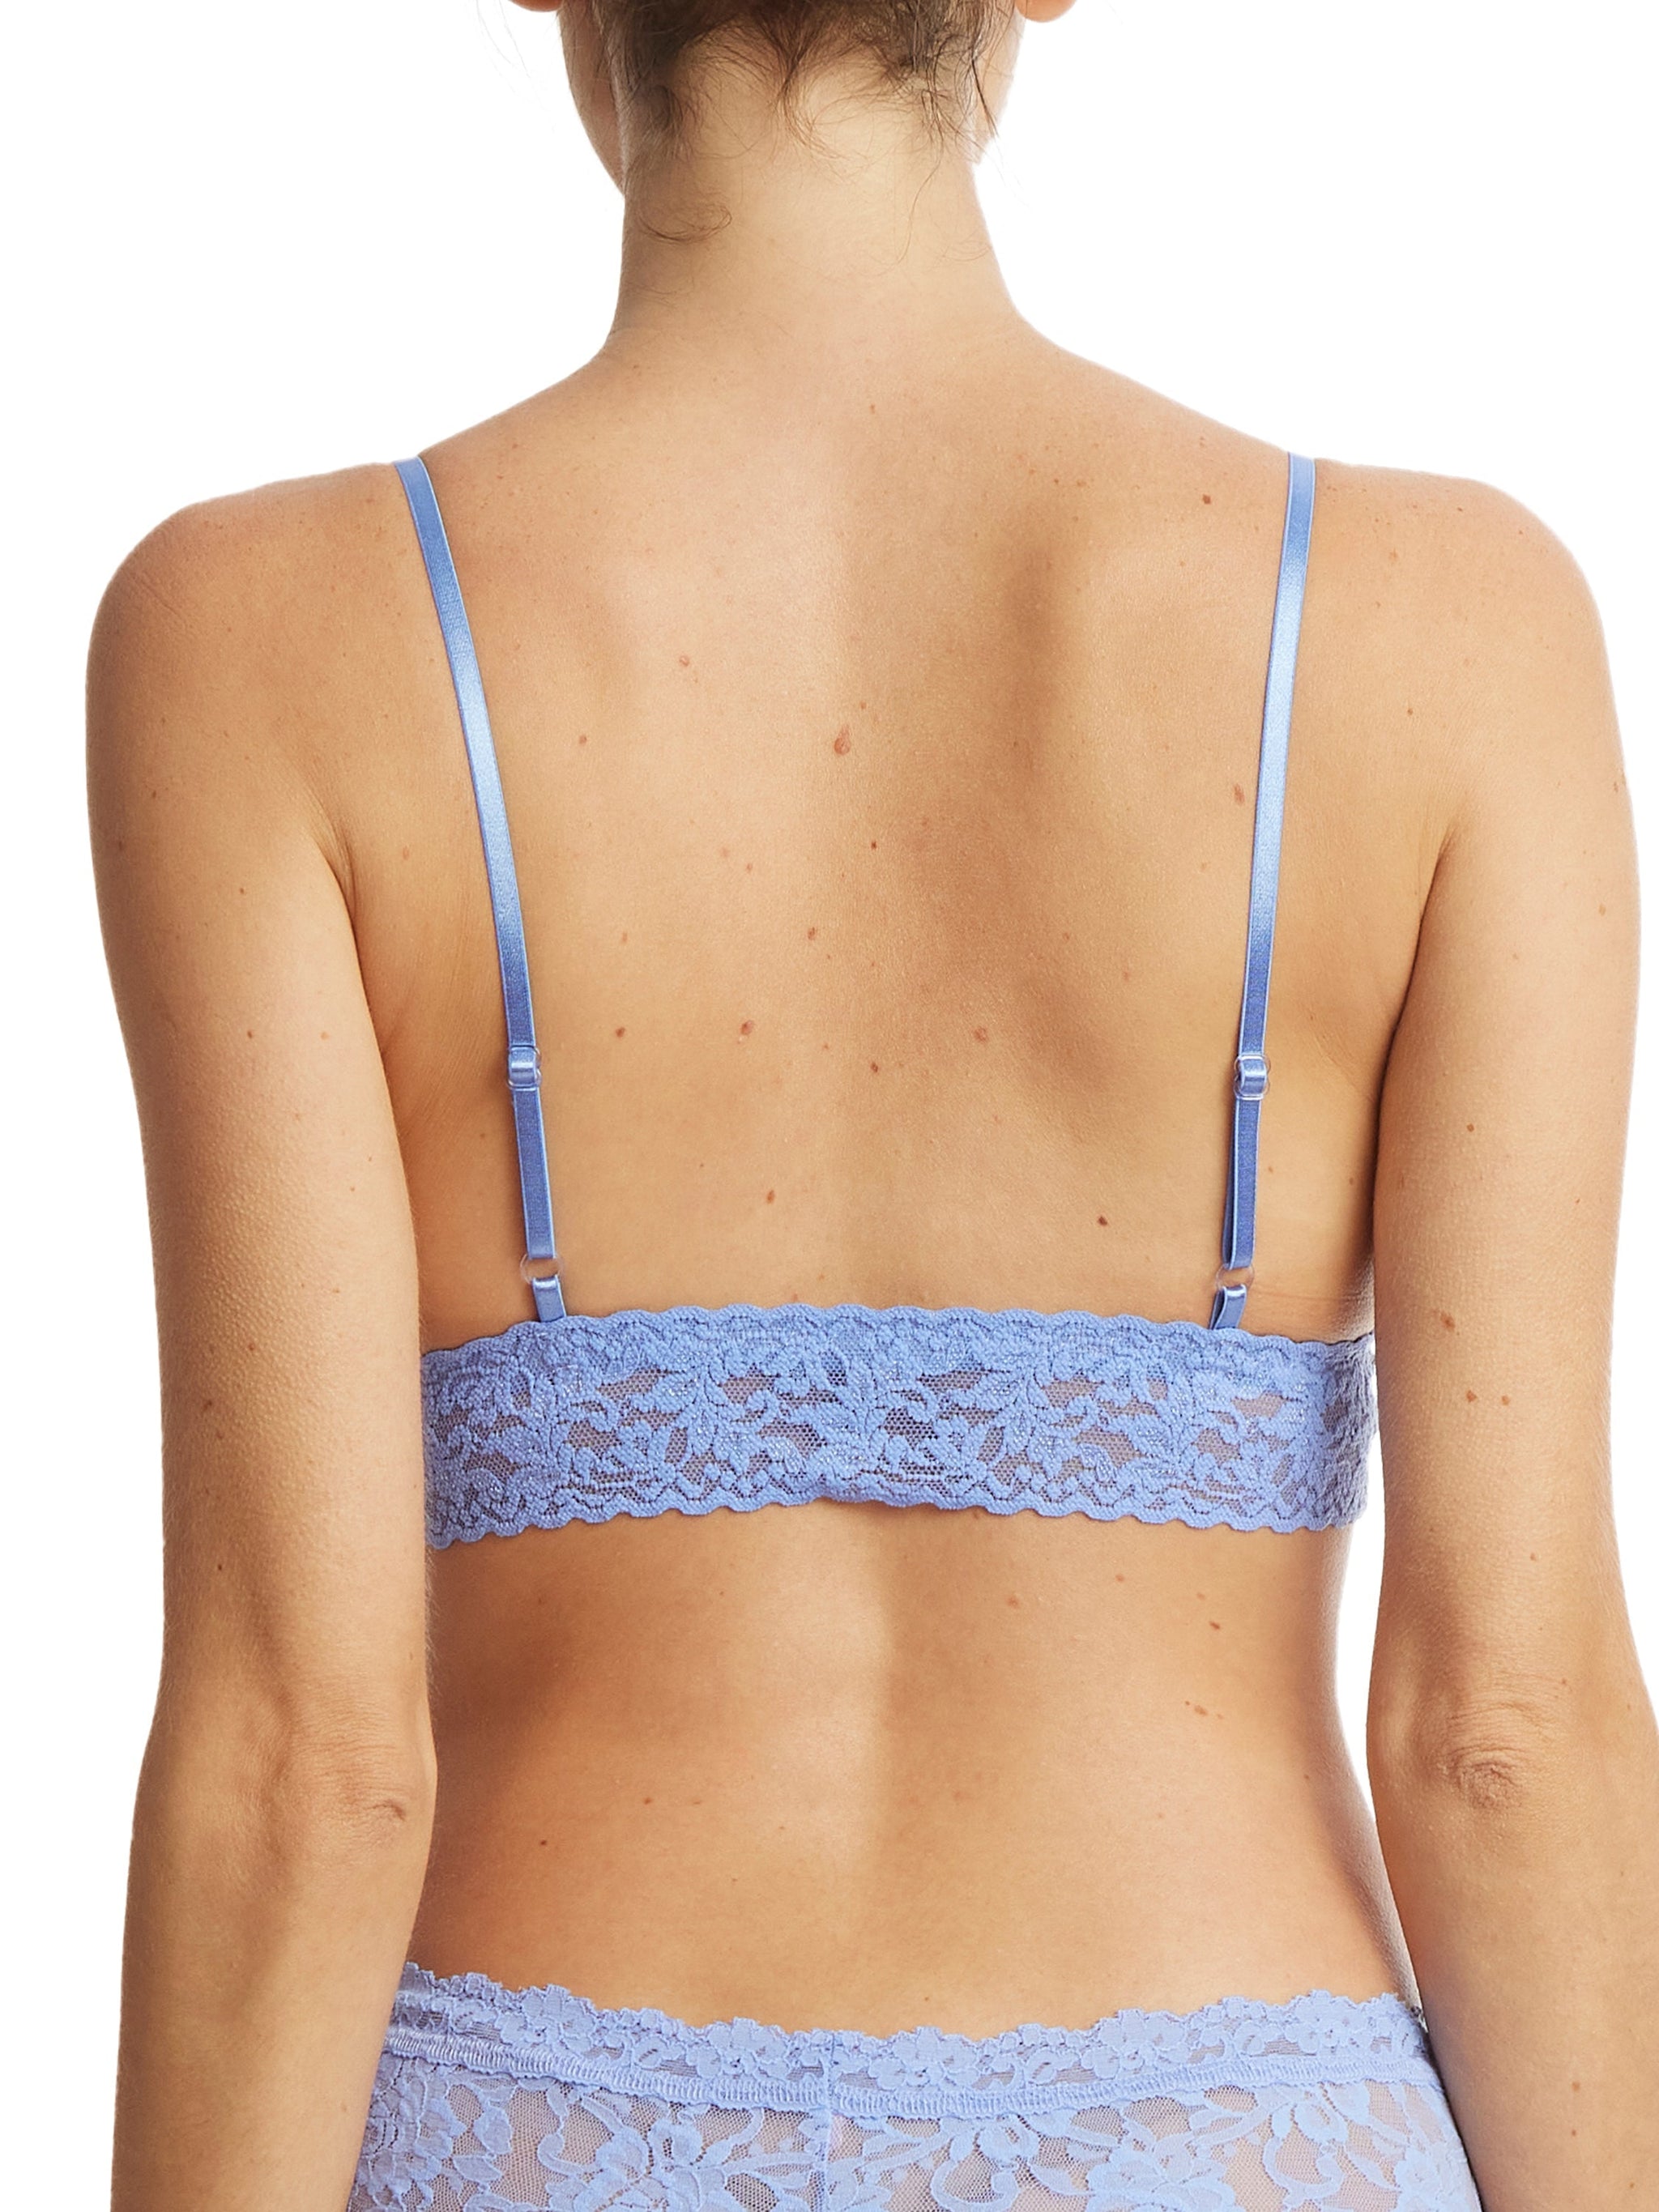 Signature Lace Padded Triangle Bralette Cool Water Blue Sale